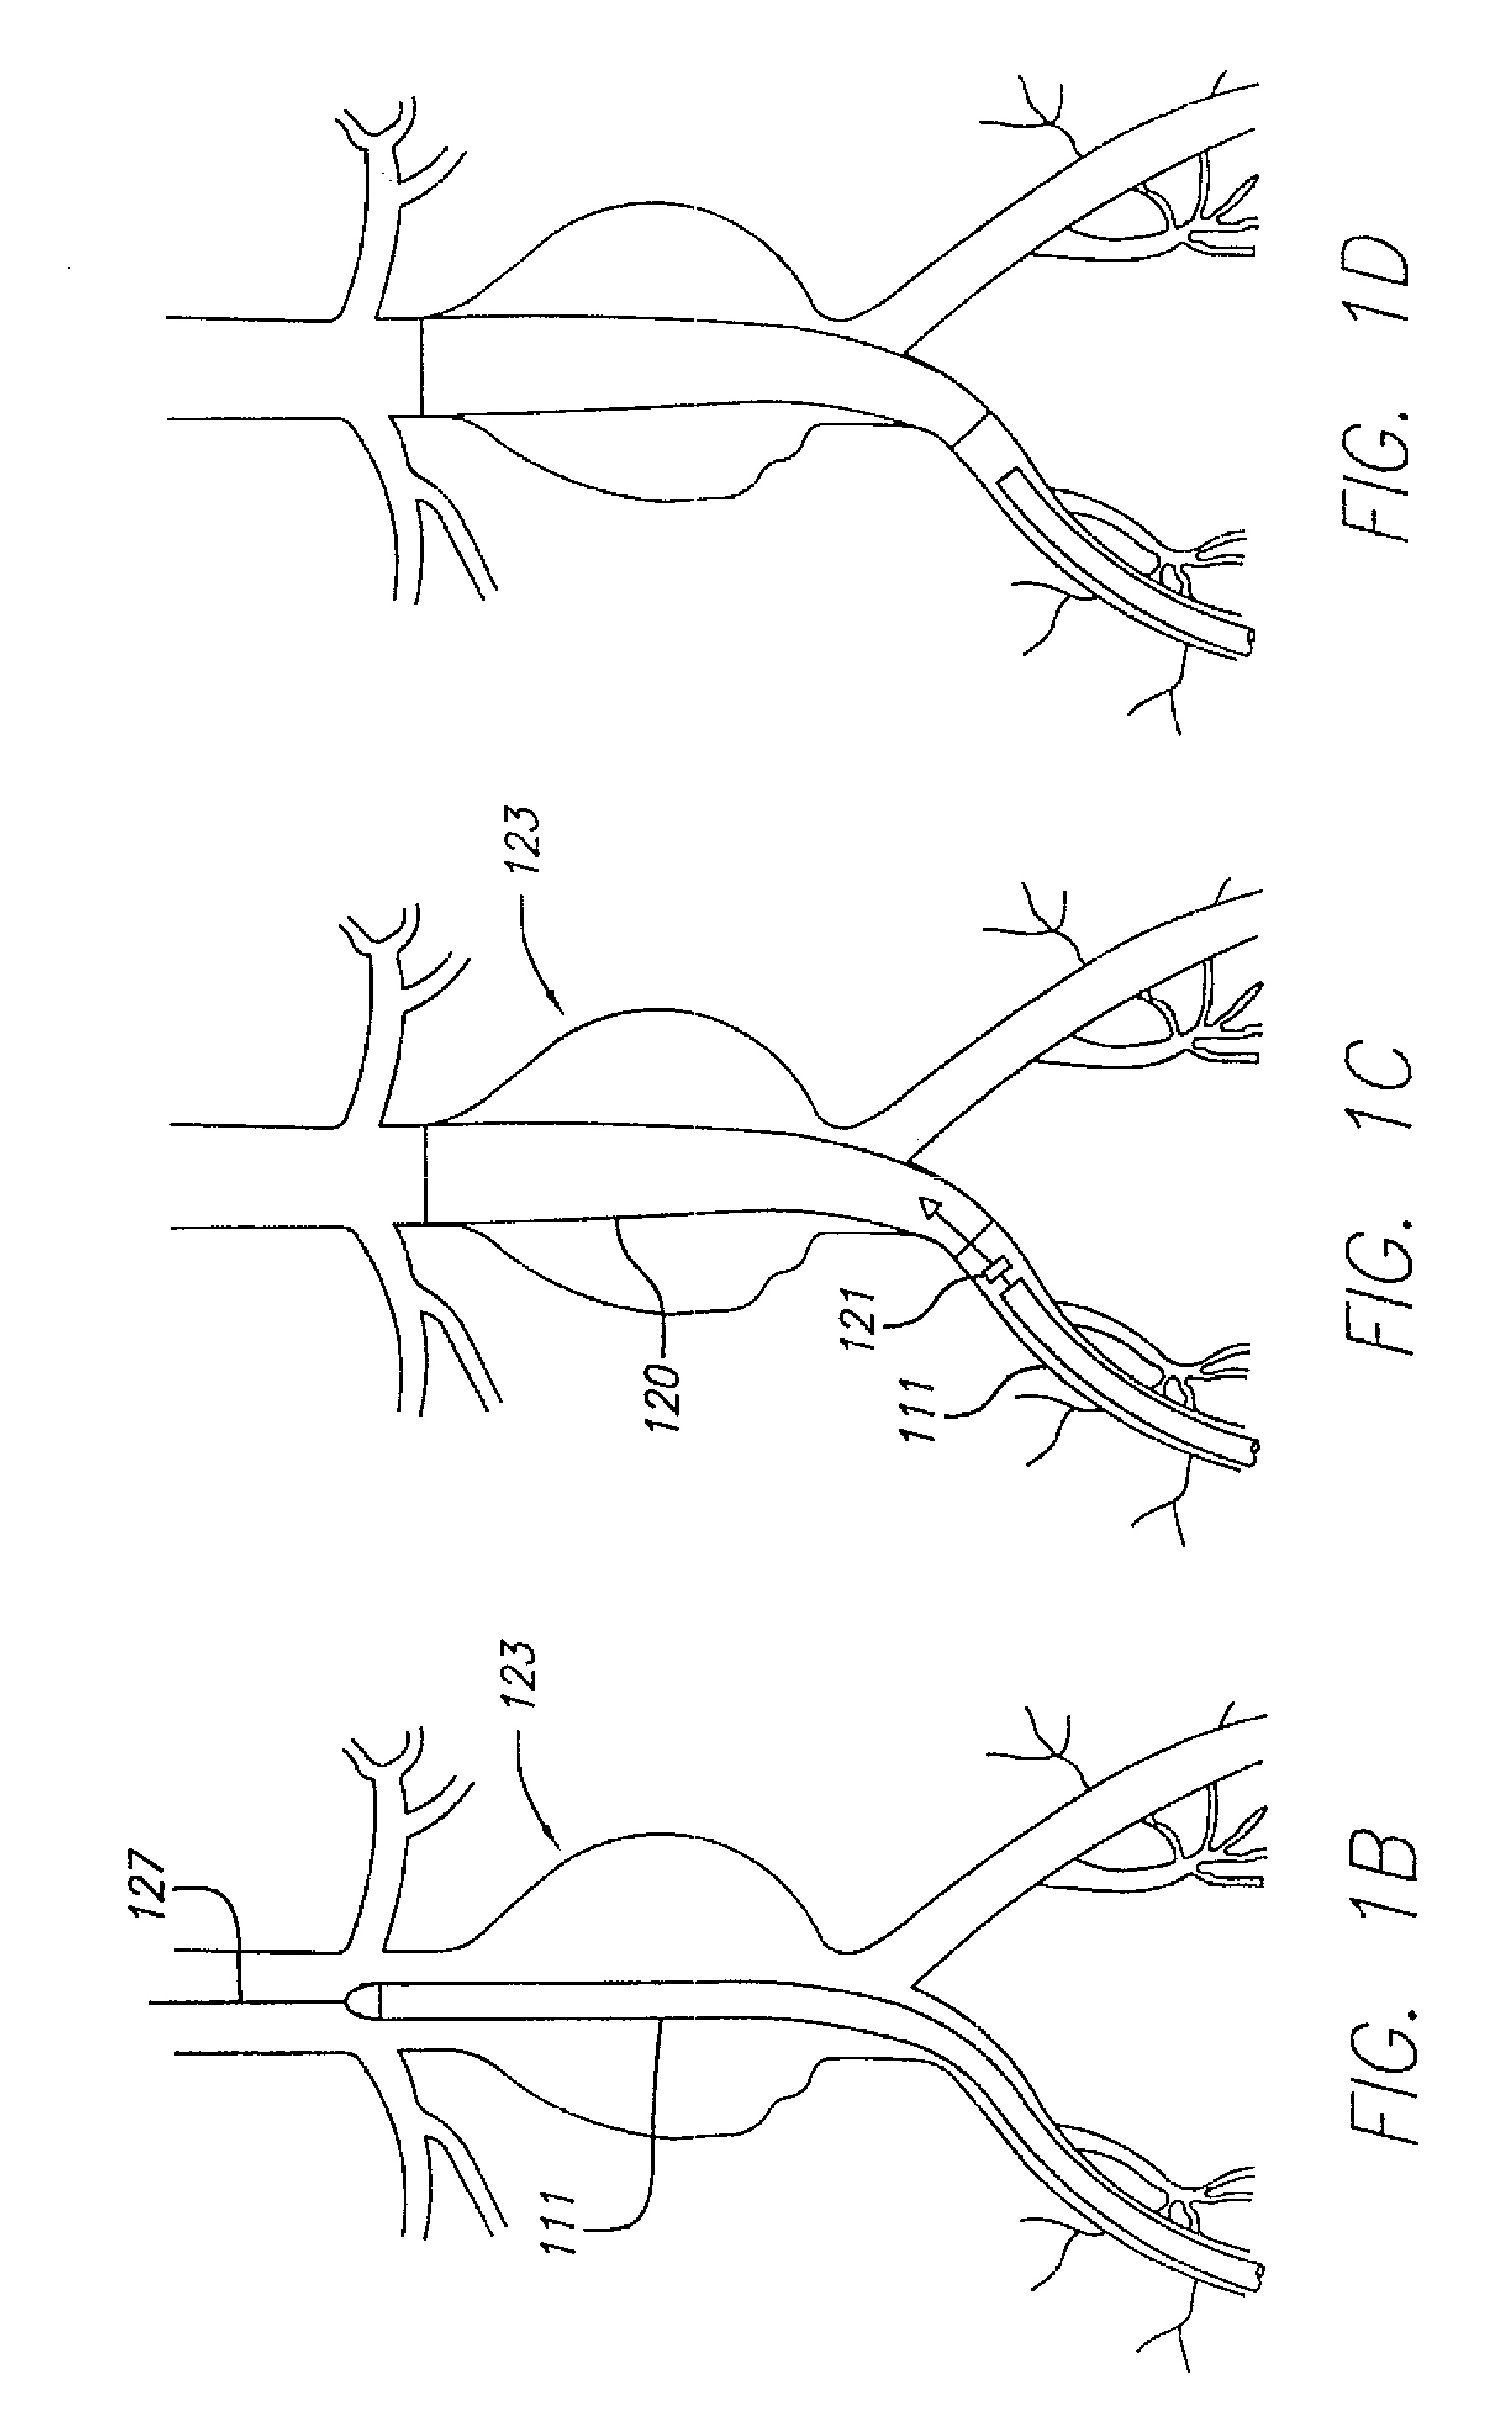 Staged endovascular graft delivery system